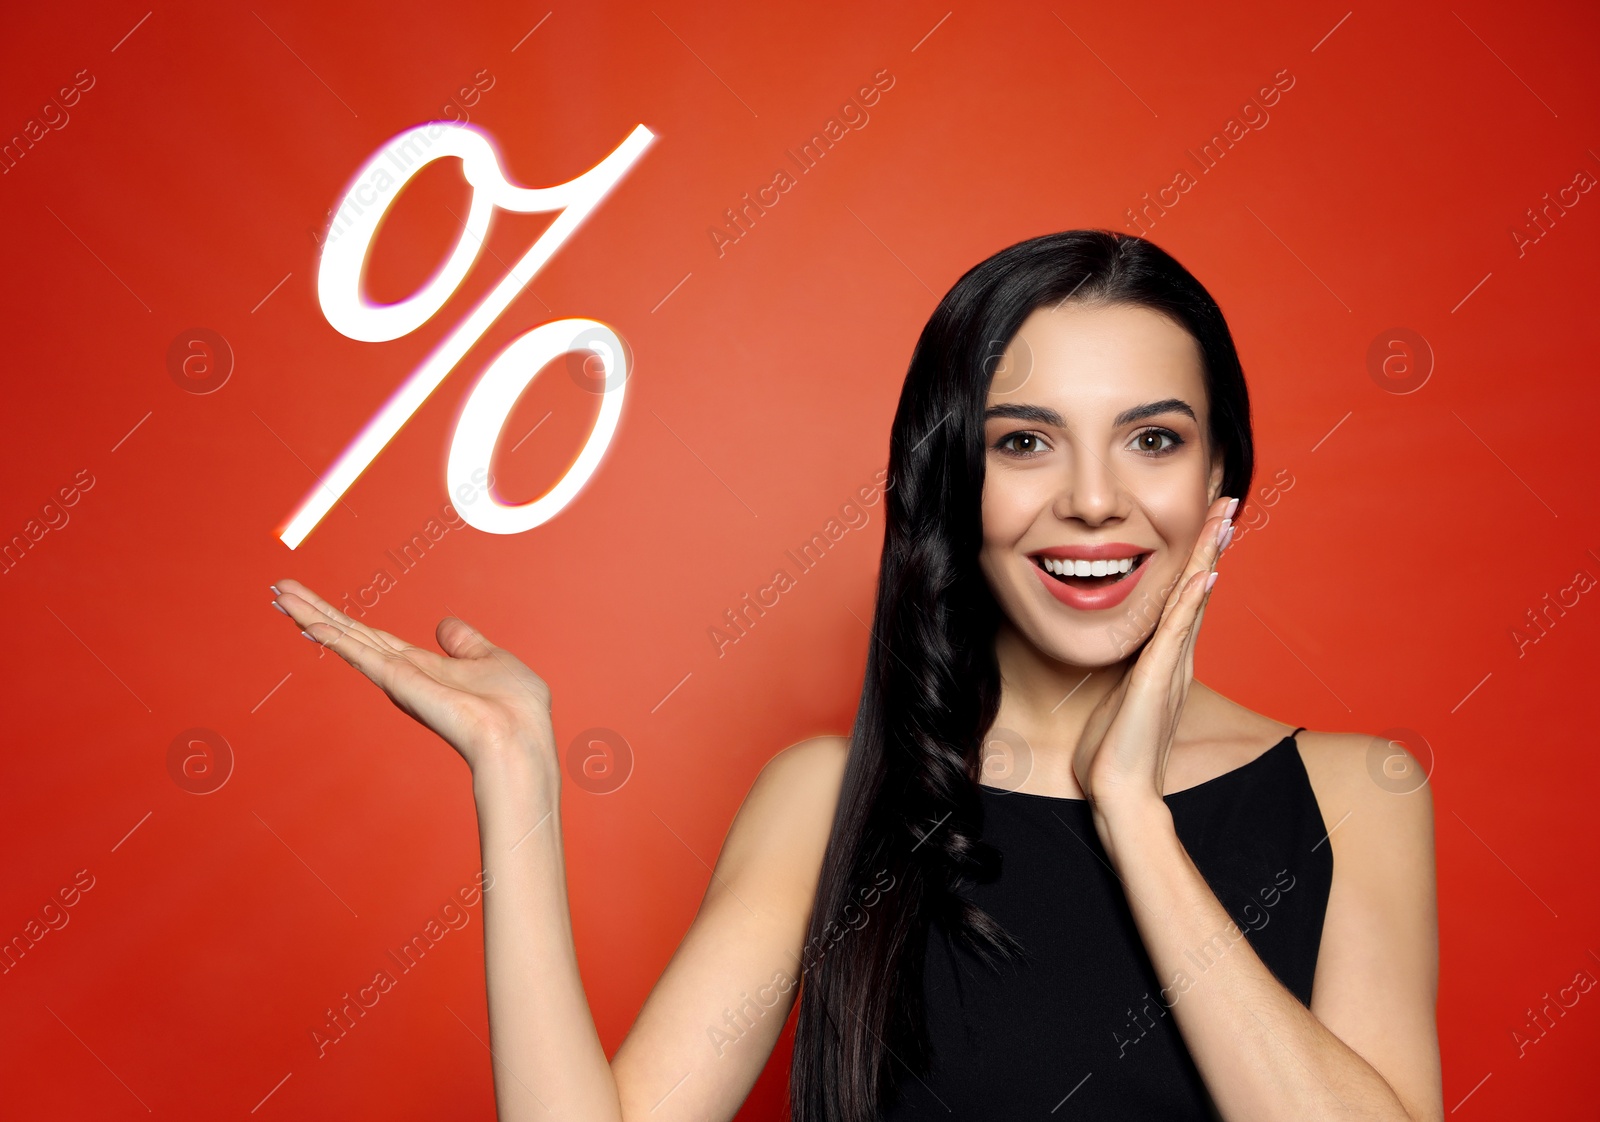 Image of Discount offer. Happy woman showing percent sign on red background